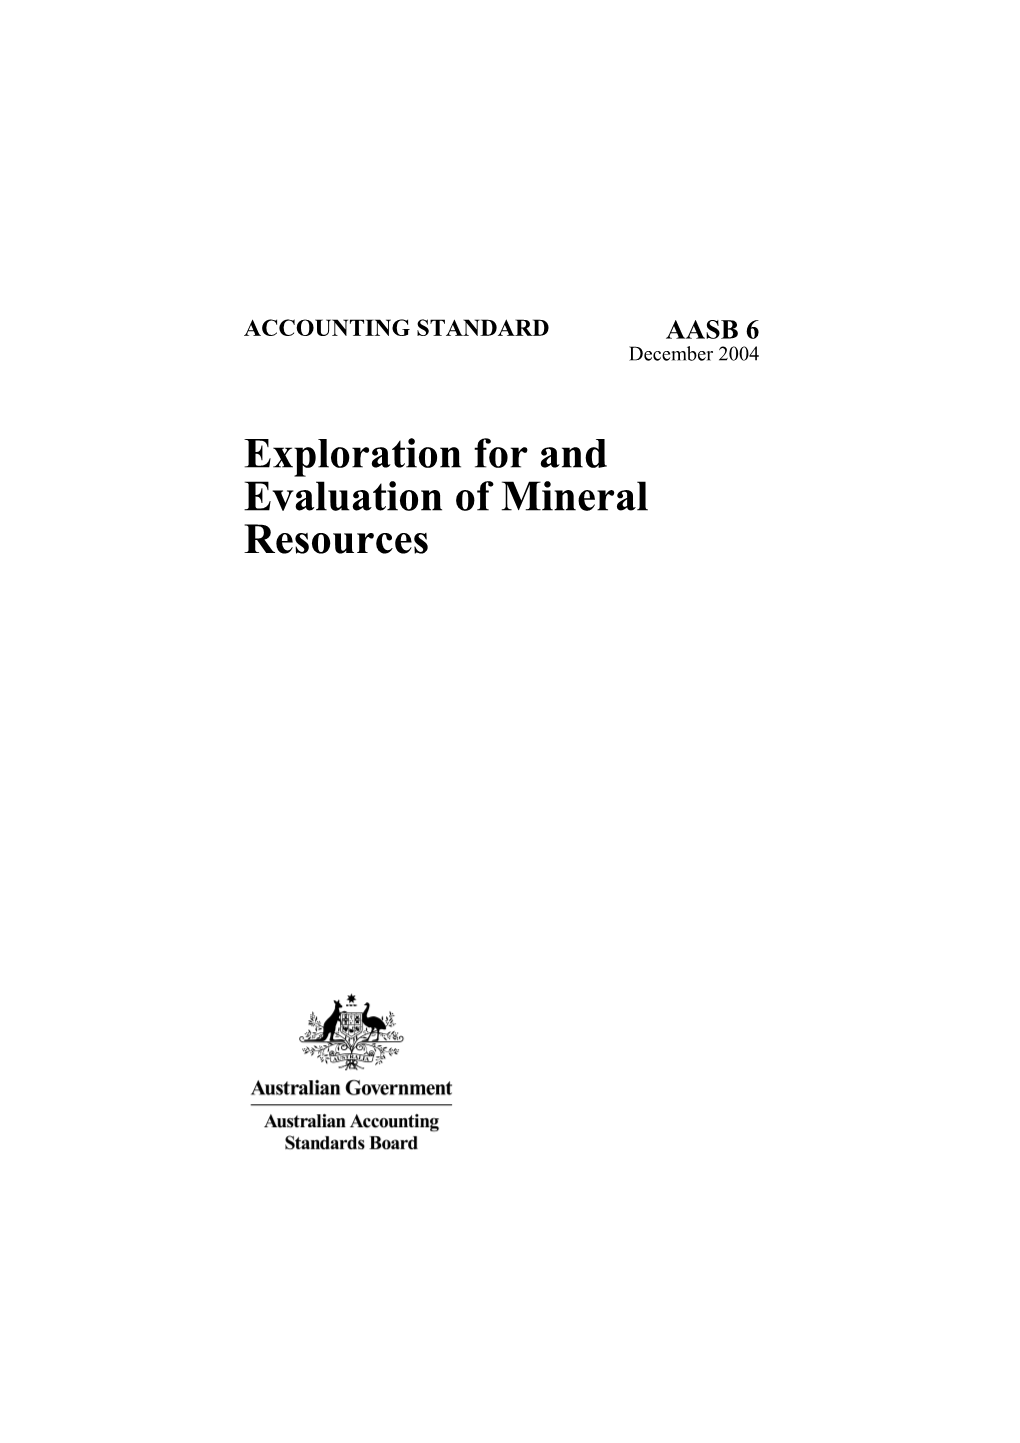 Exploration for and Evaluation of Mineral Resources